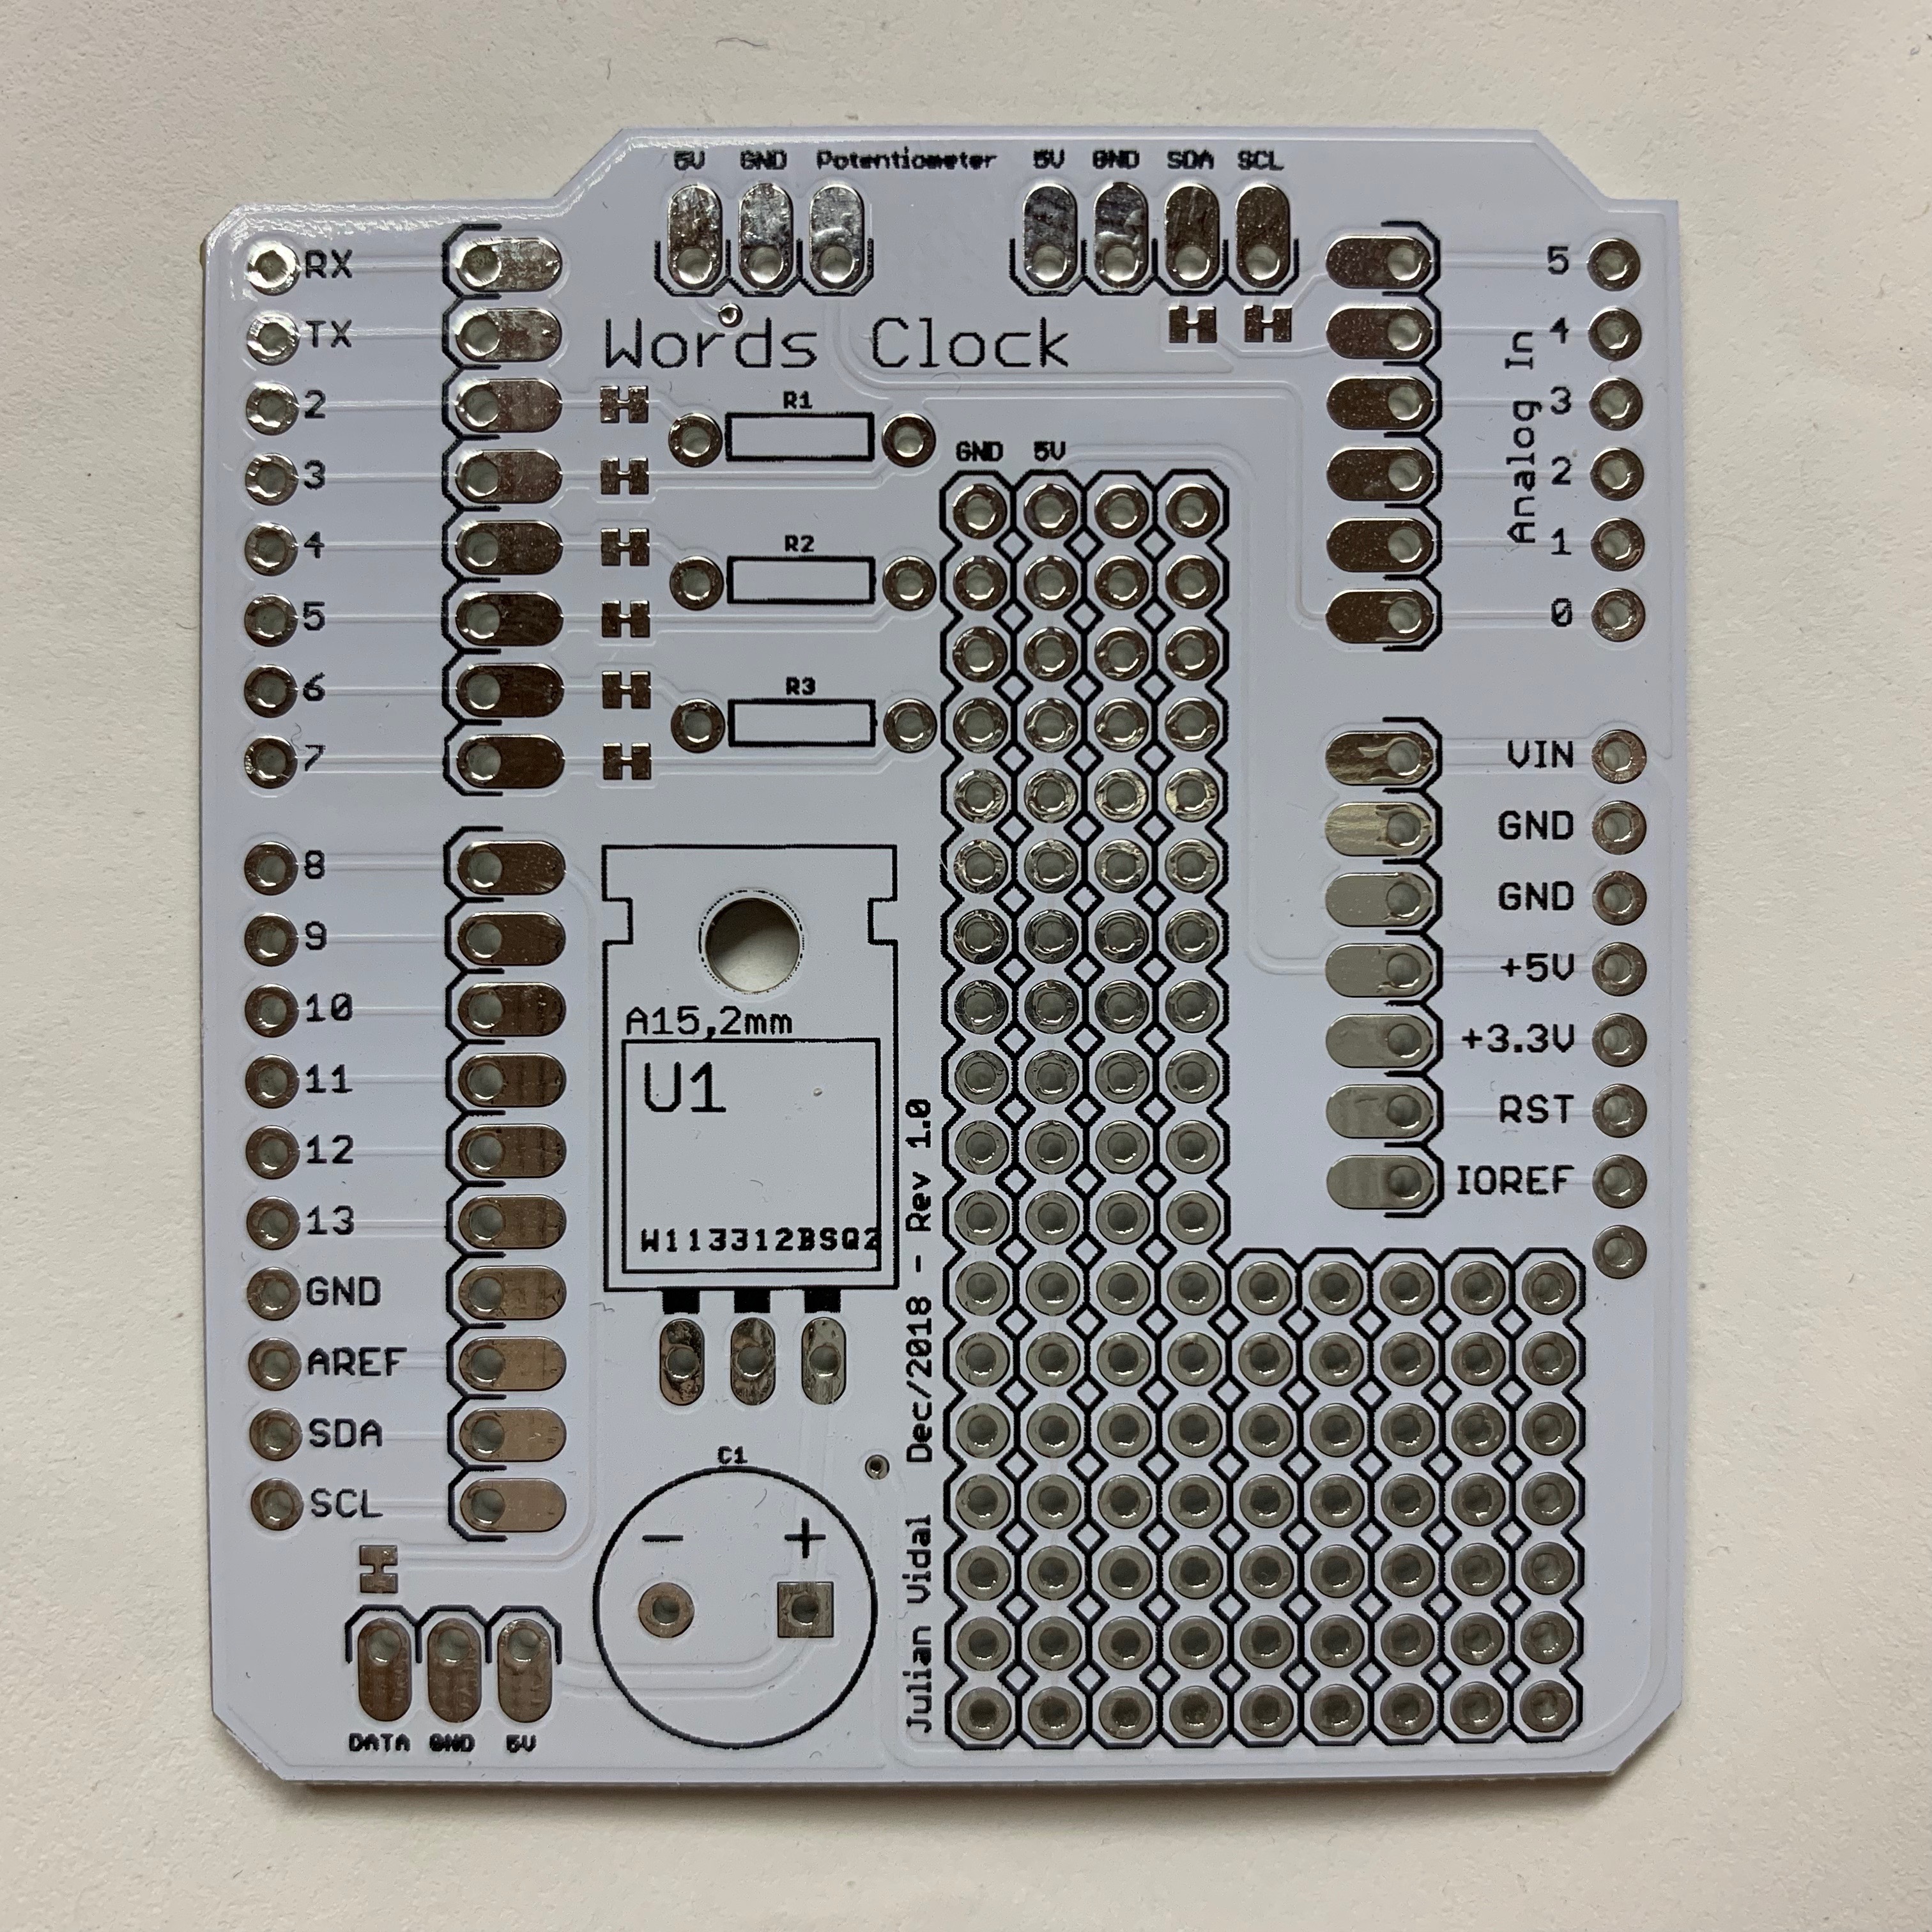 PCBWay PCB Prototyping review (aka how I made an LED word clock)